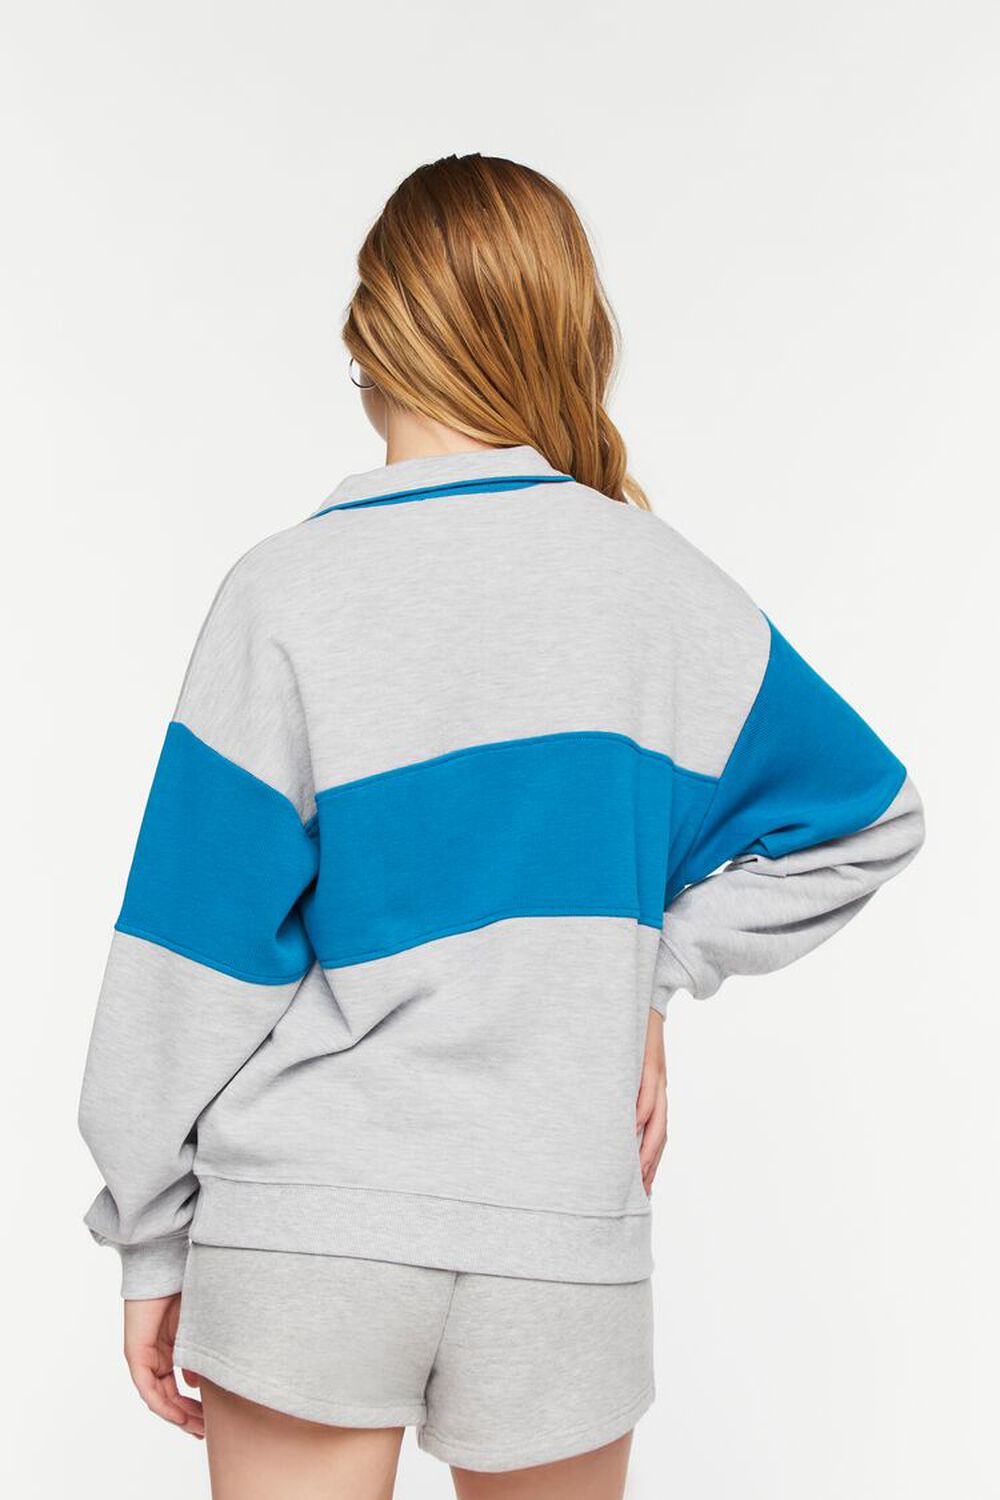 HEATHER GREY/BLUE New York Heathered Graphic Pullover, image 3